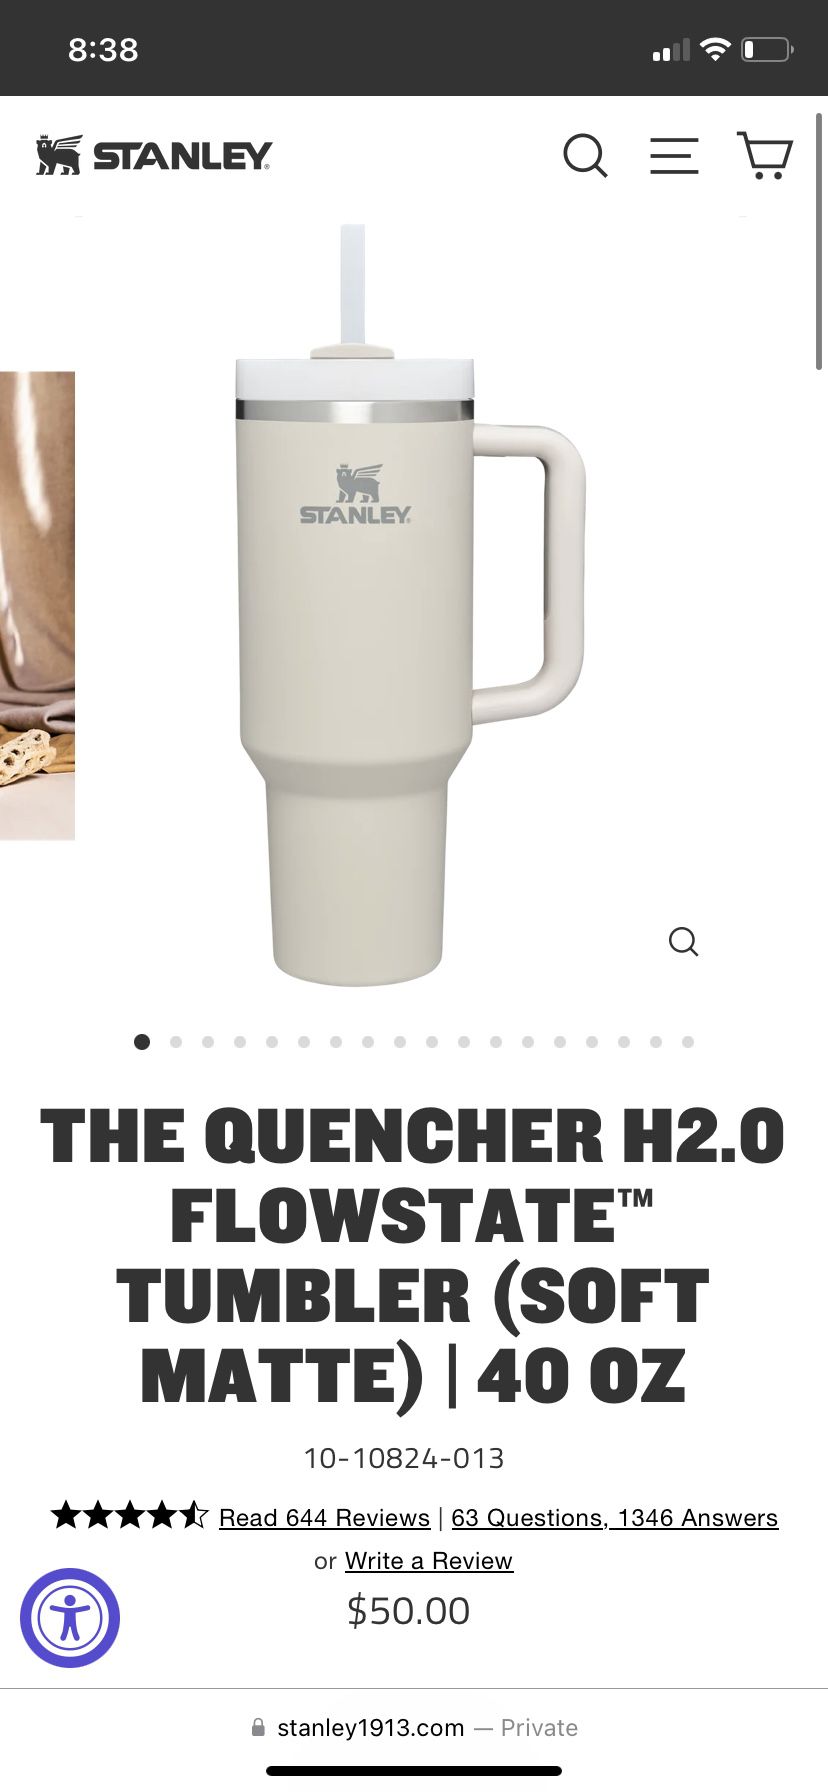 Stanley Quencher H2.0 Flowstate Tumbler Soft Matte 40 OZ Unboxing